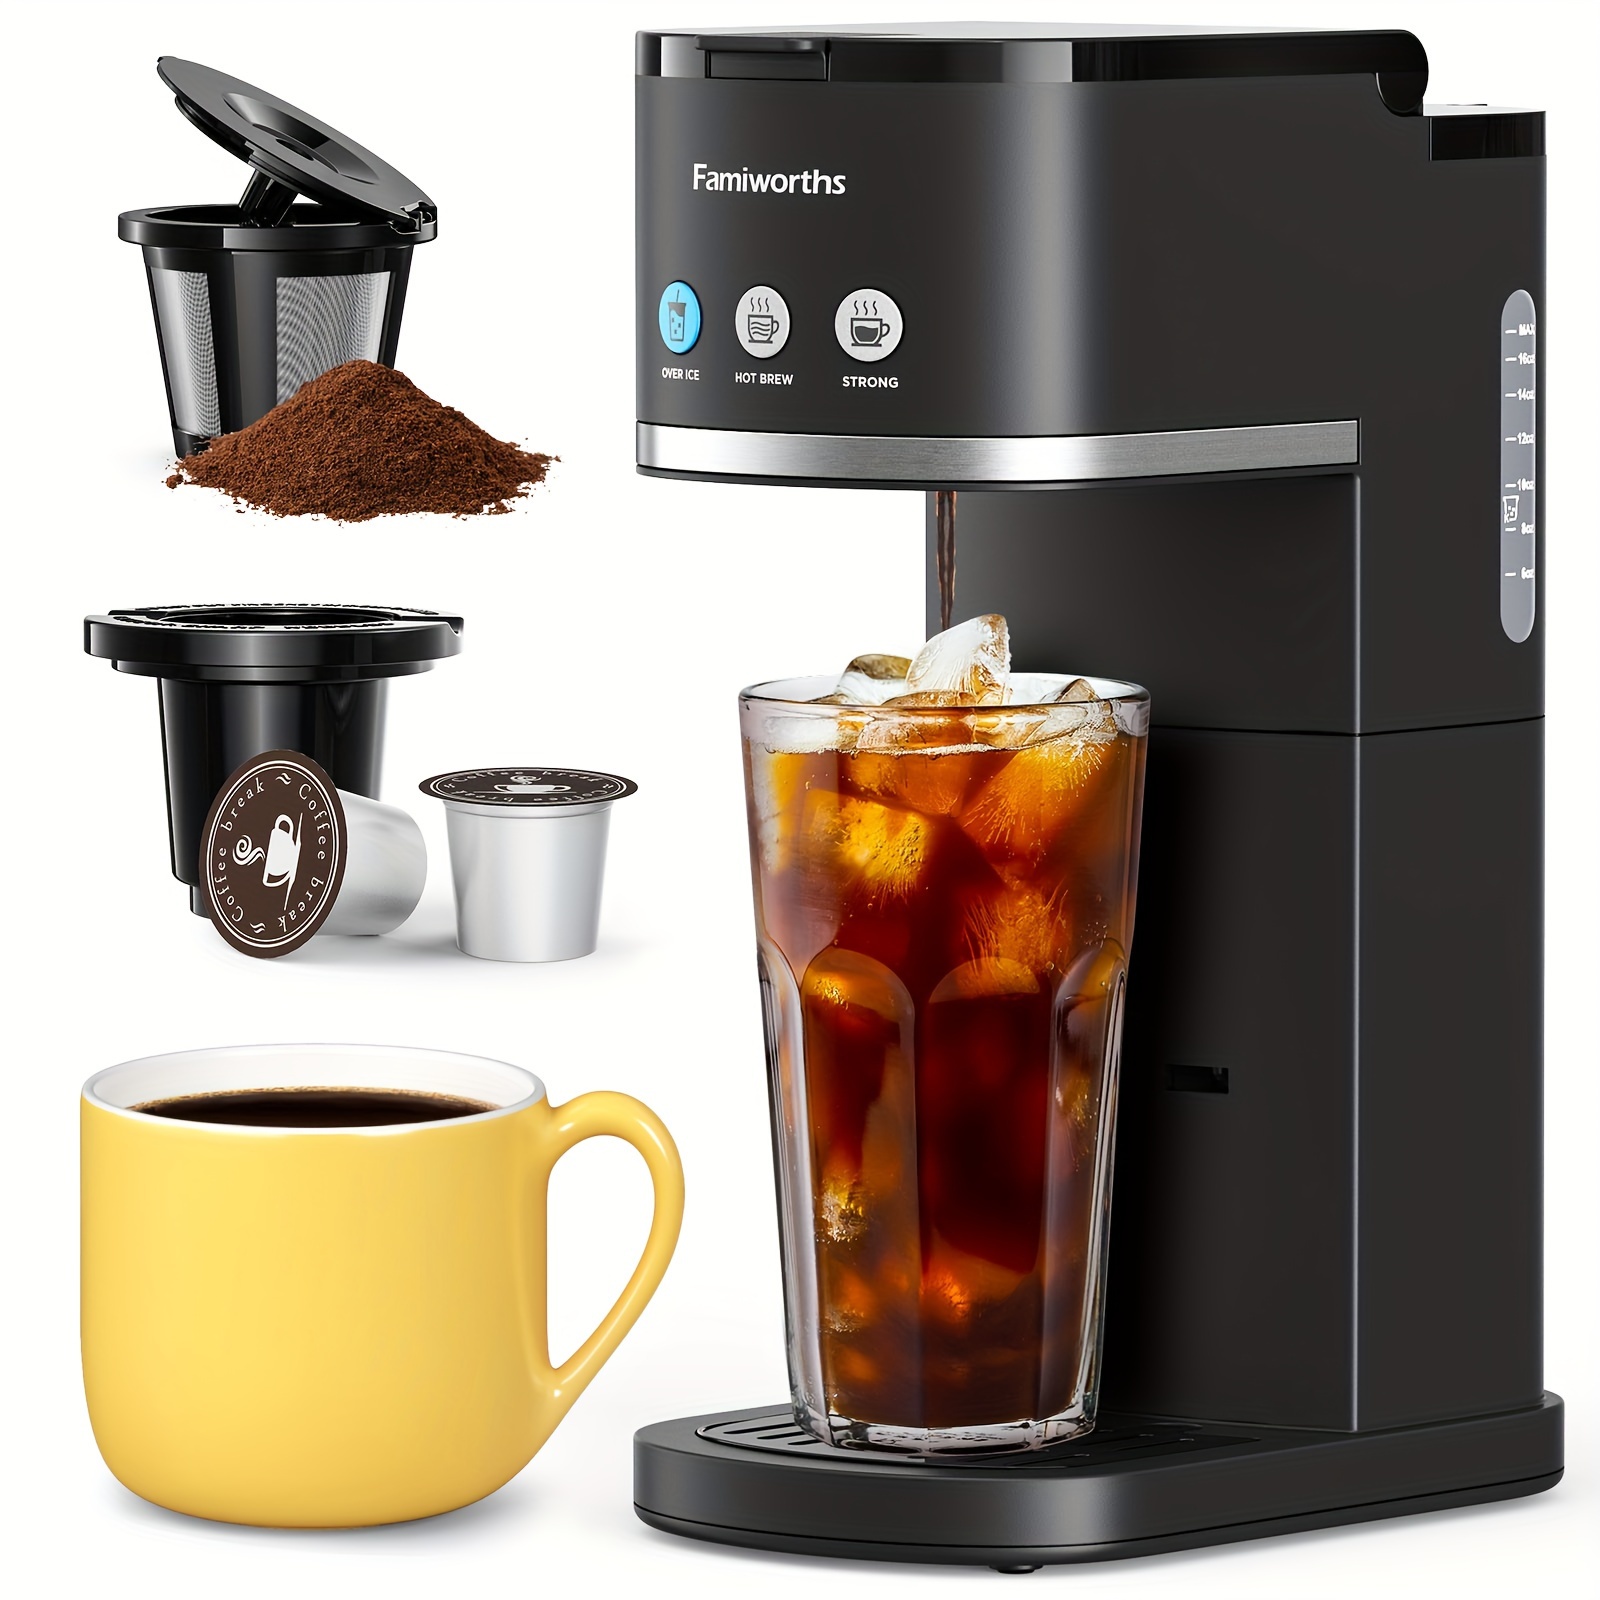 

Famiworths Single Serve Coffee Maker, Iced And Hot Coffee Machine For K Cup & Ground Coffee, 6 To 16 Oz Brew Sizes, Fit 8.5" Travel Mug, Capsule Coffee Machine With Descaling Reminder, Black